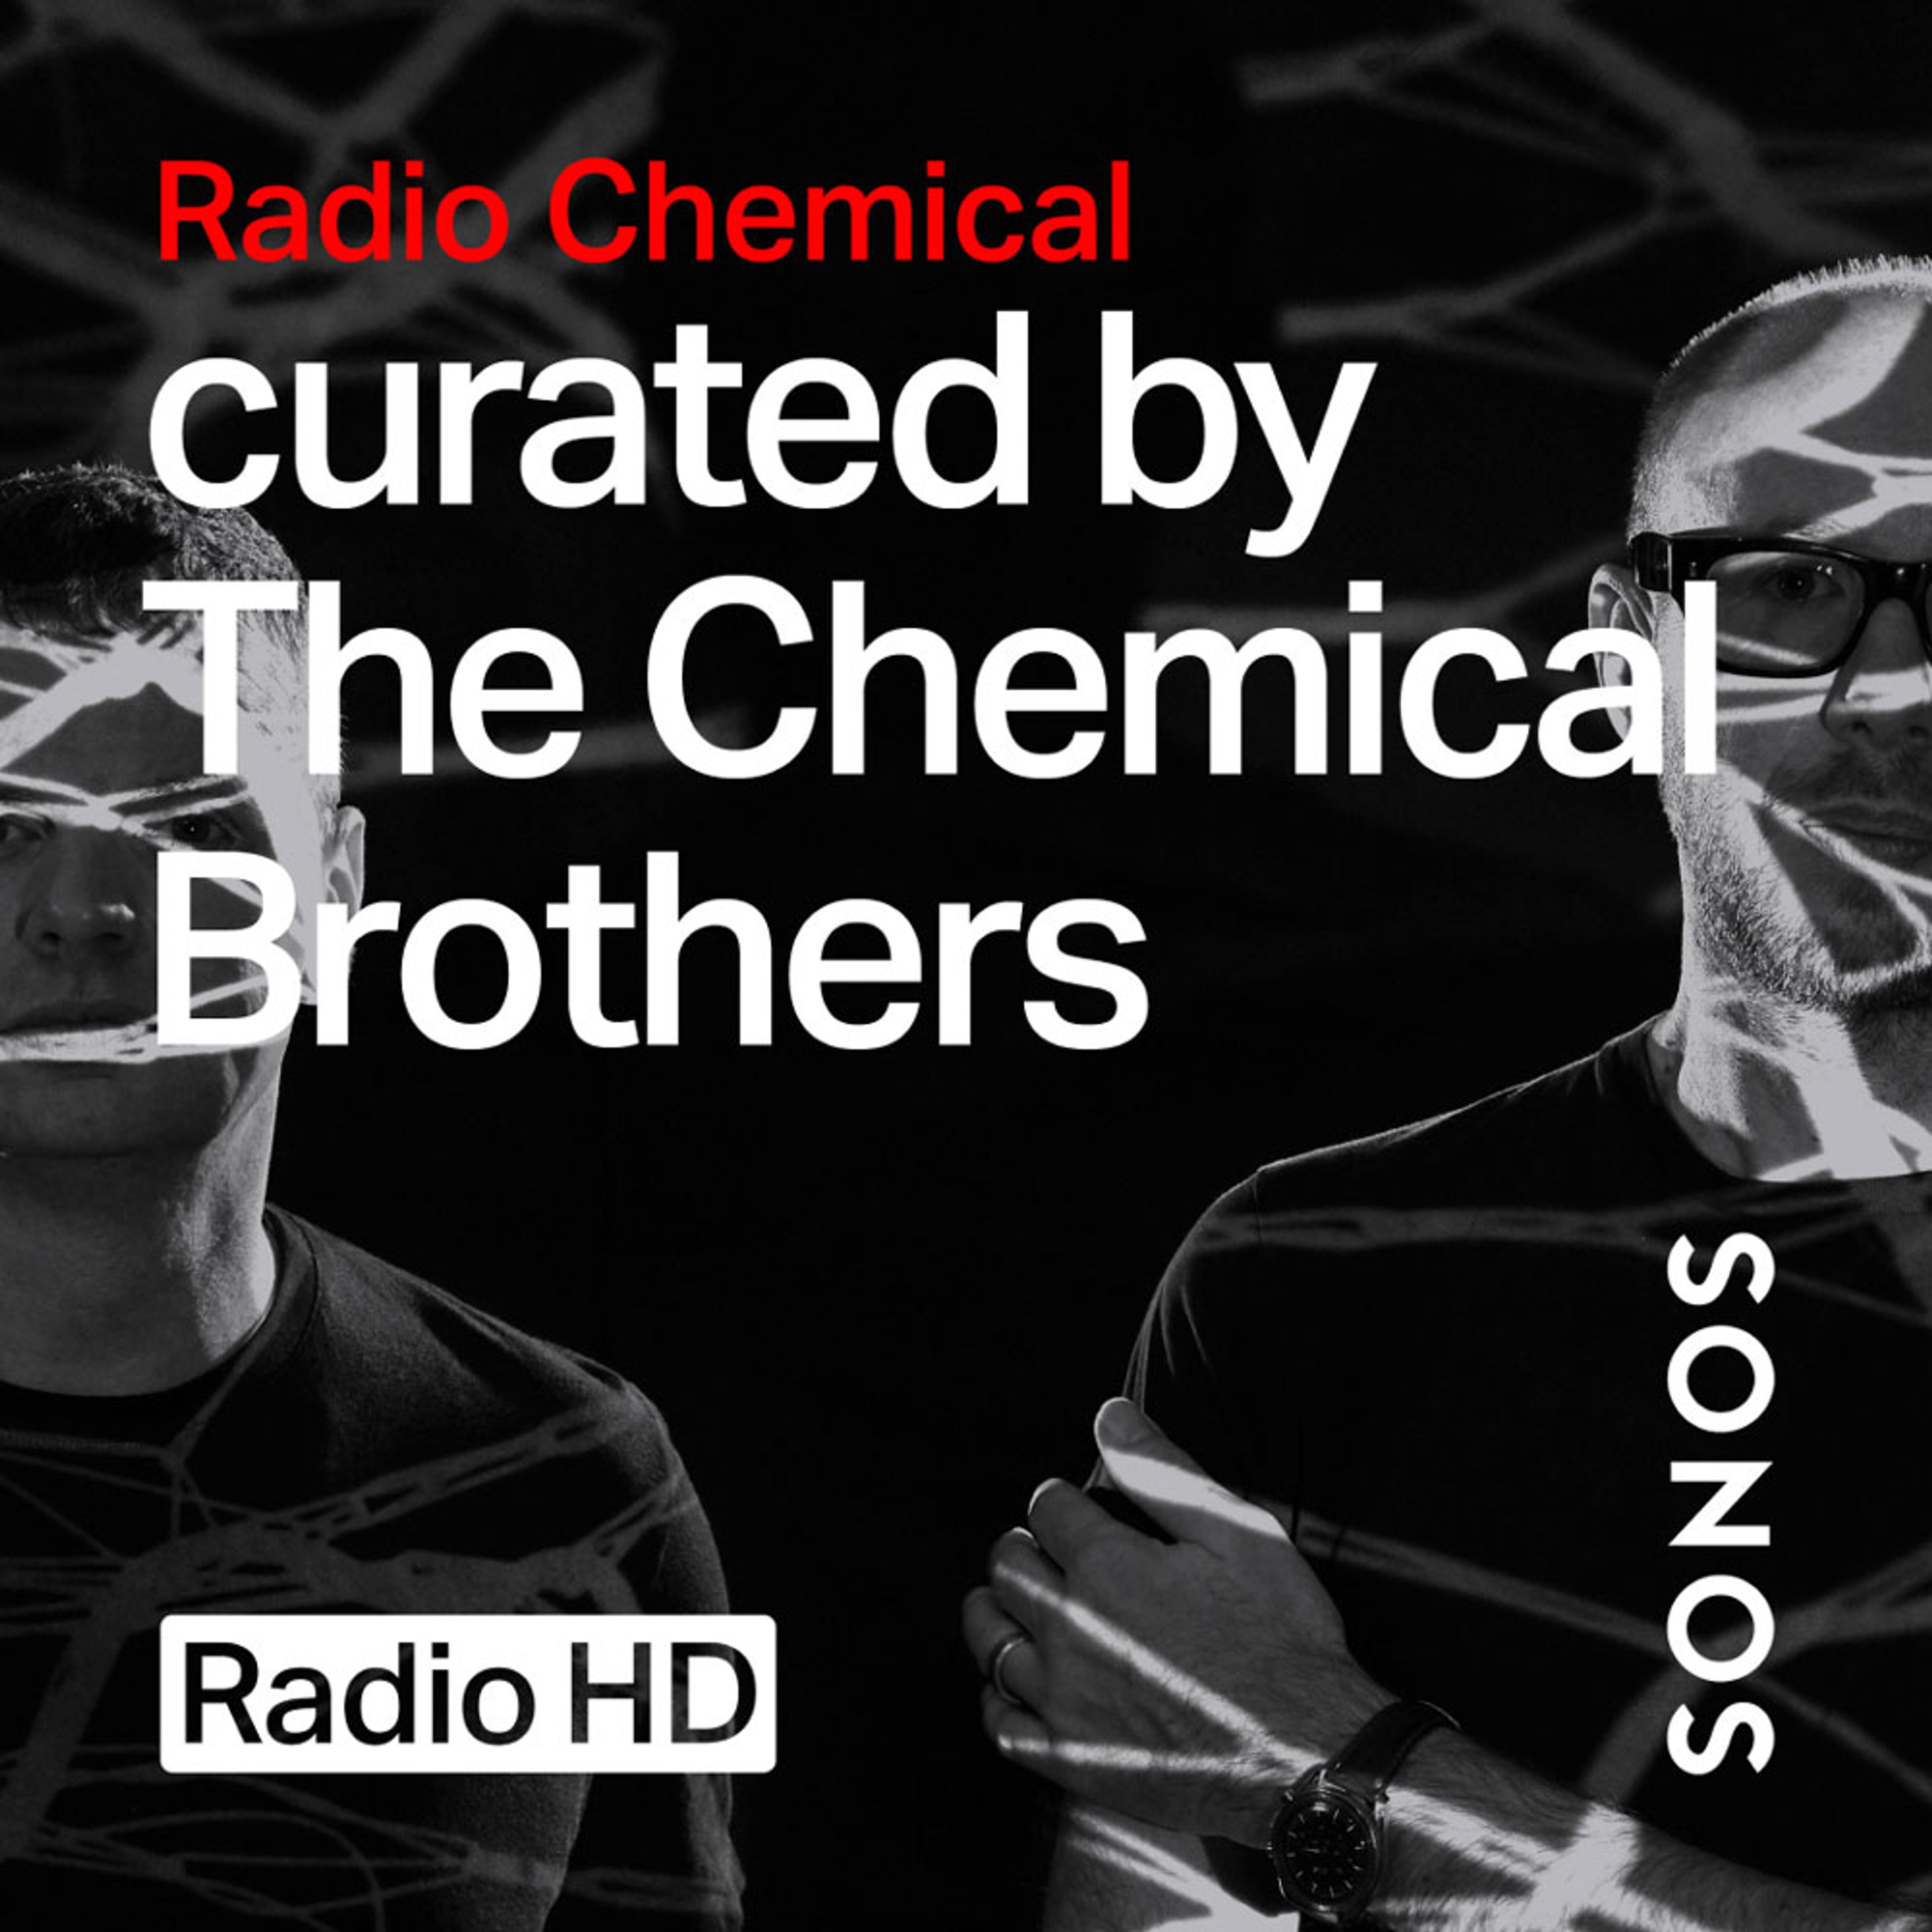 The Chemical Brothers radio station cover